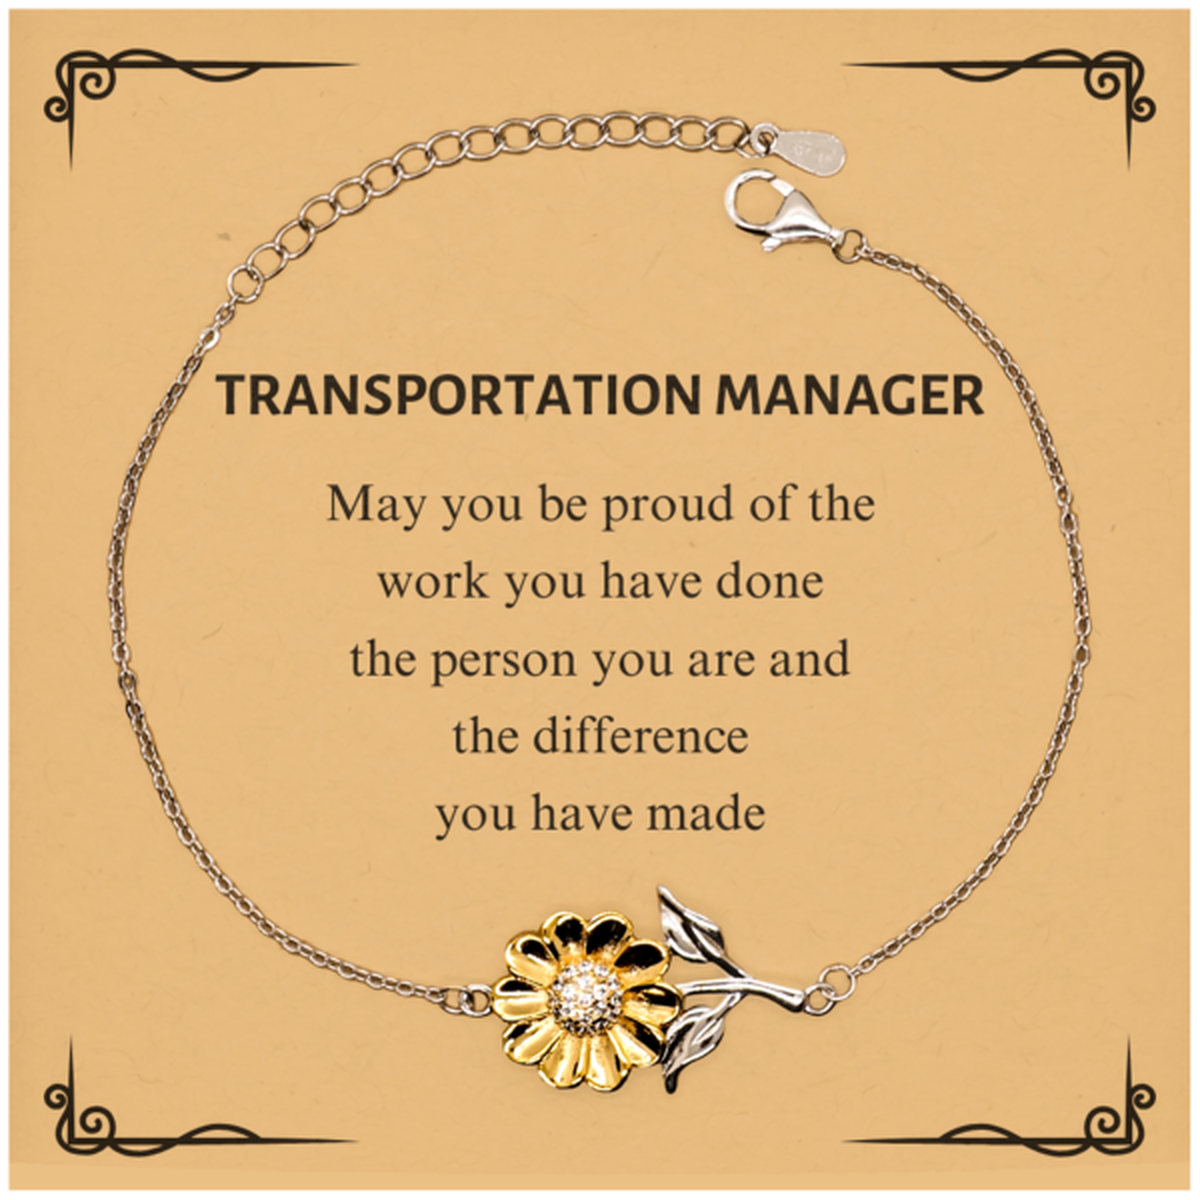 Transportation Manager May you be proud of the work you have done, Retirement Transportation Manager Sunflower Bracelet for Colleague Appreciation Gifts Amazing for Transportation Manager